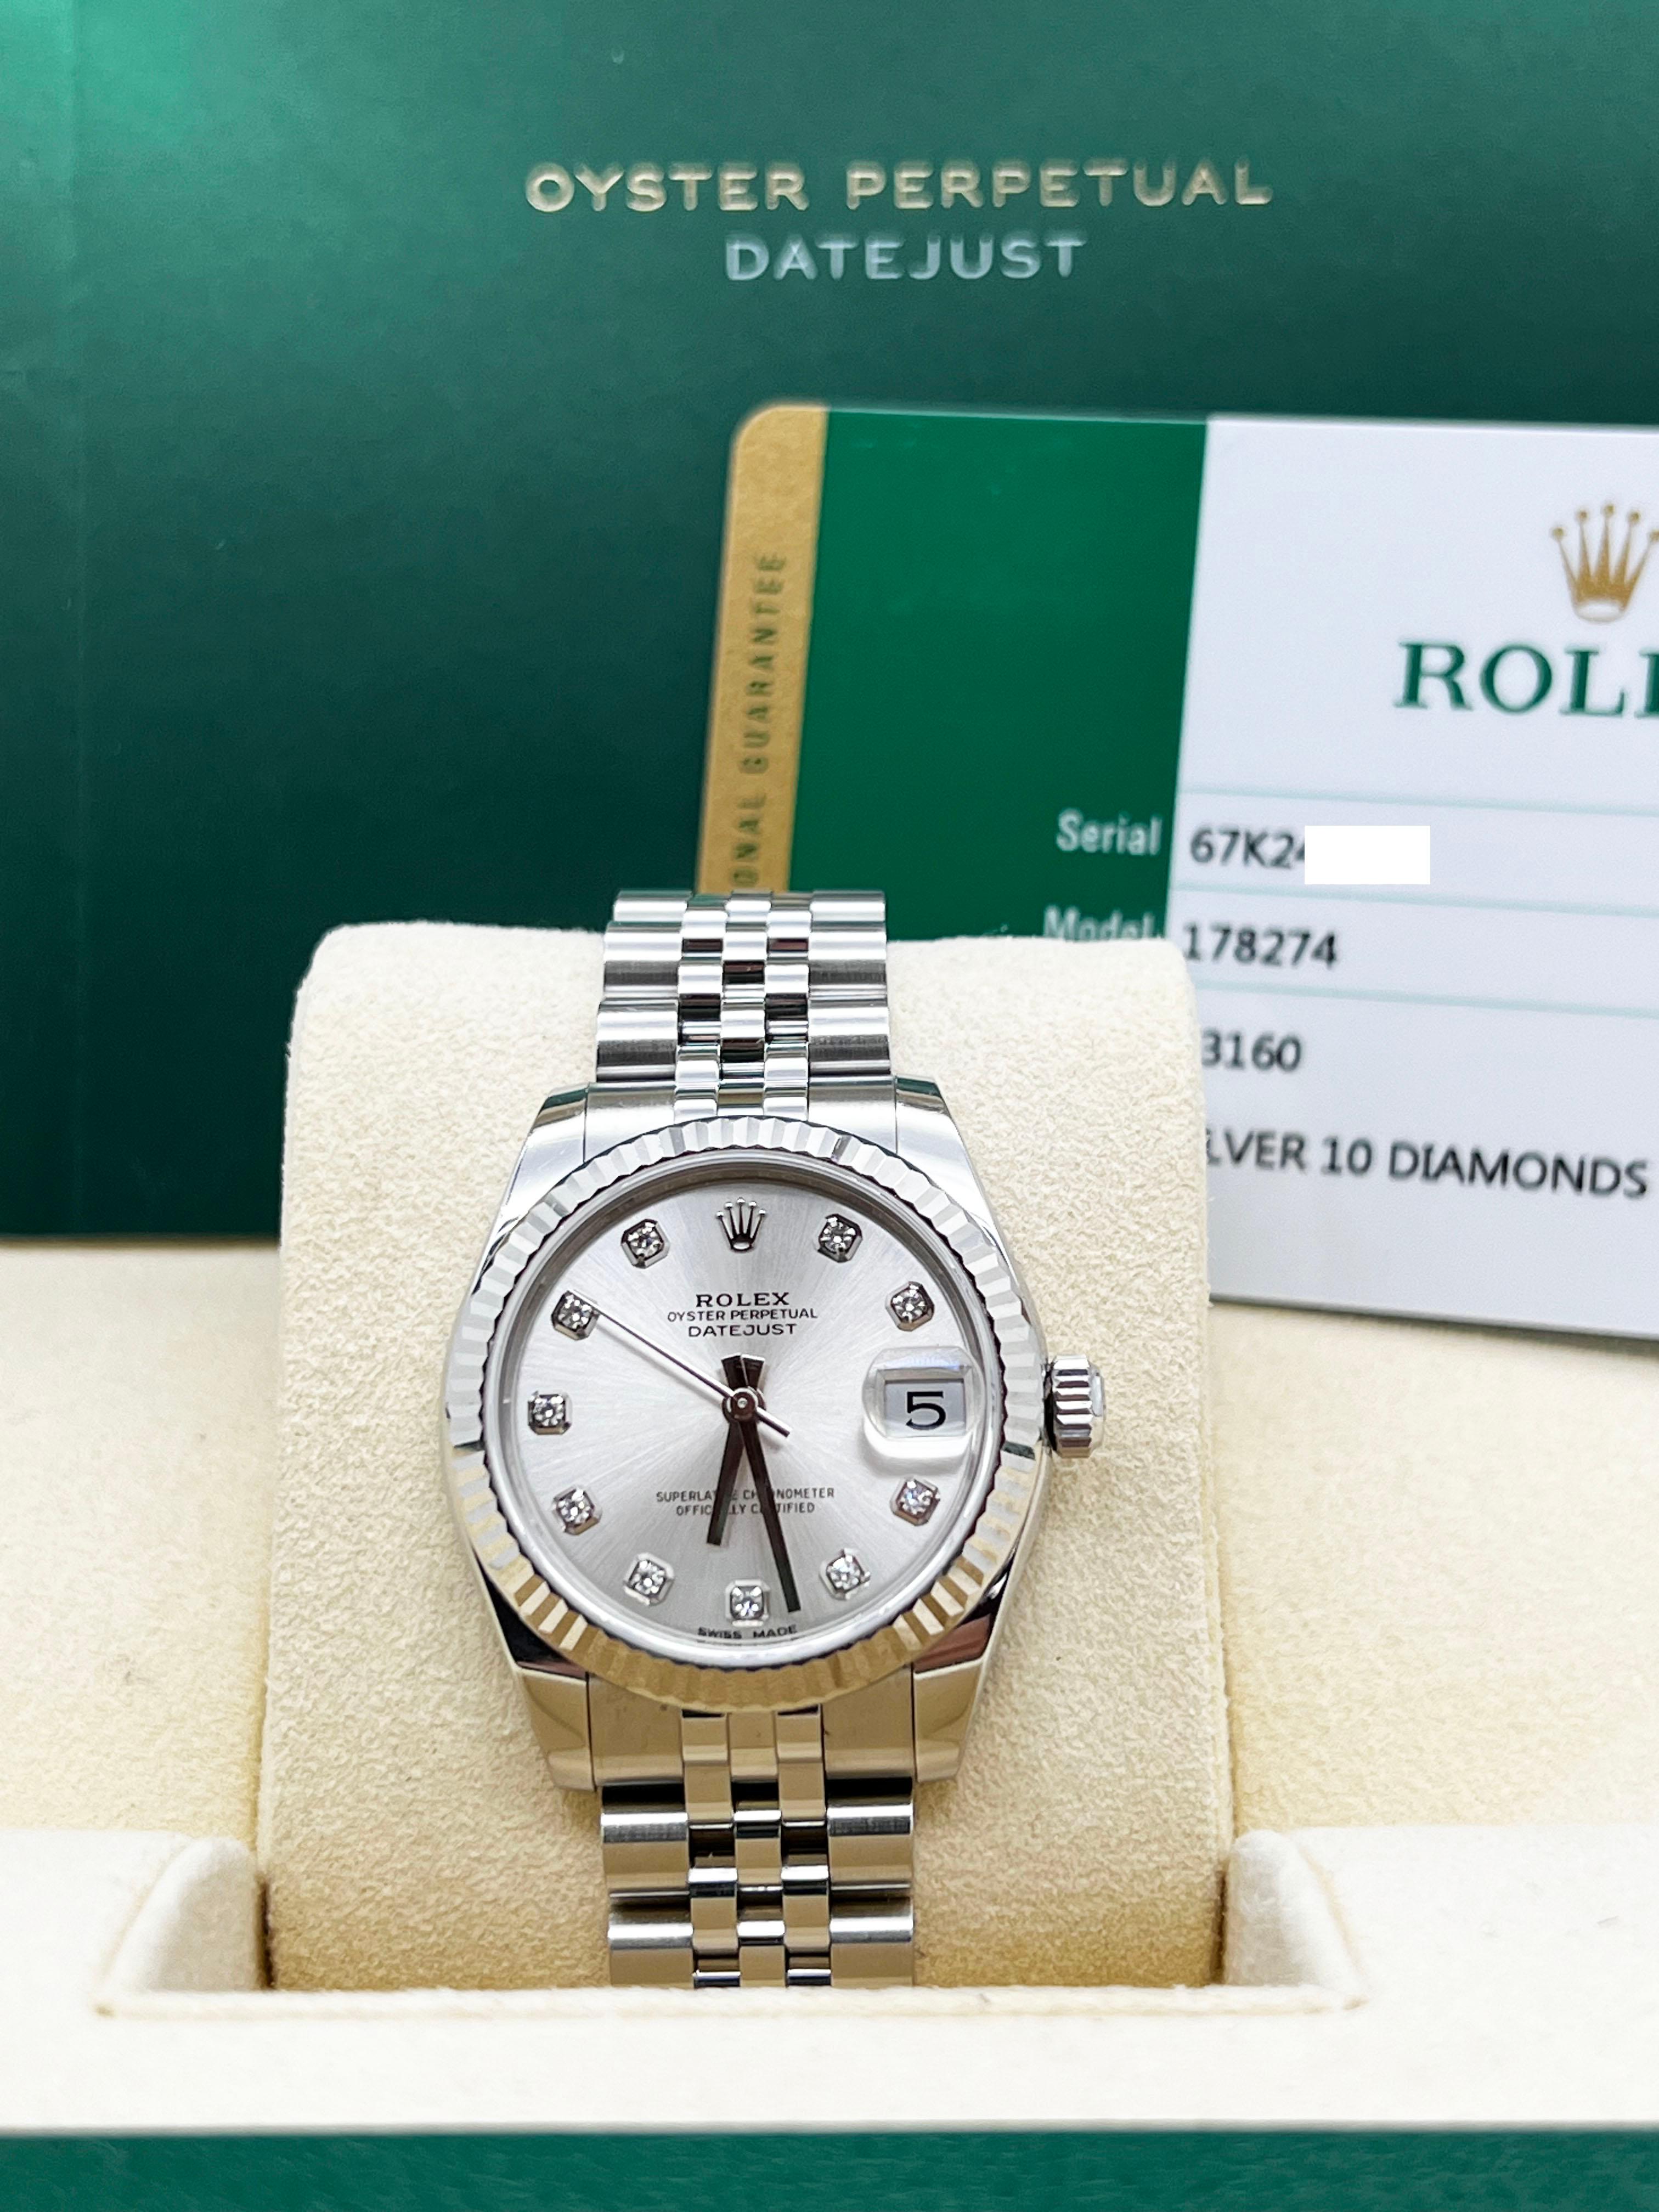 Style Number: 178274 Midsize



Serial: 67K24***



Year: 2019

 

Model: Datejust

 

Case Material: Stainless Steel 

 

Band: Stainless Steel 

 

Bezel: 18K White Gold Fluted Bezel 

 

Dial: Original Factory Silver Diamond Dial 

 

Face: